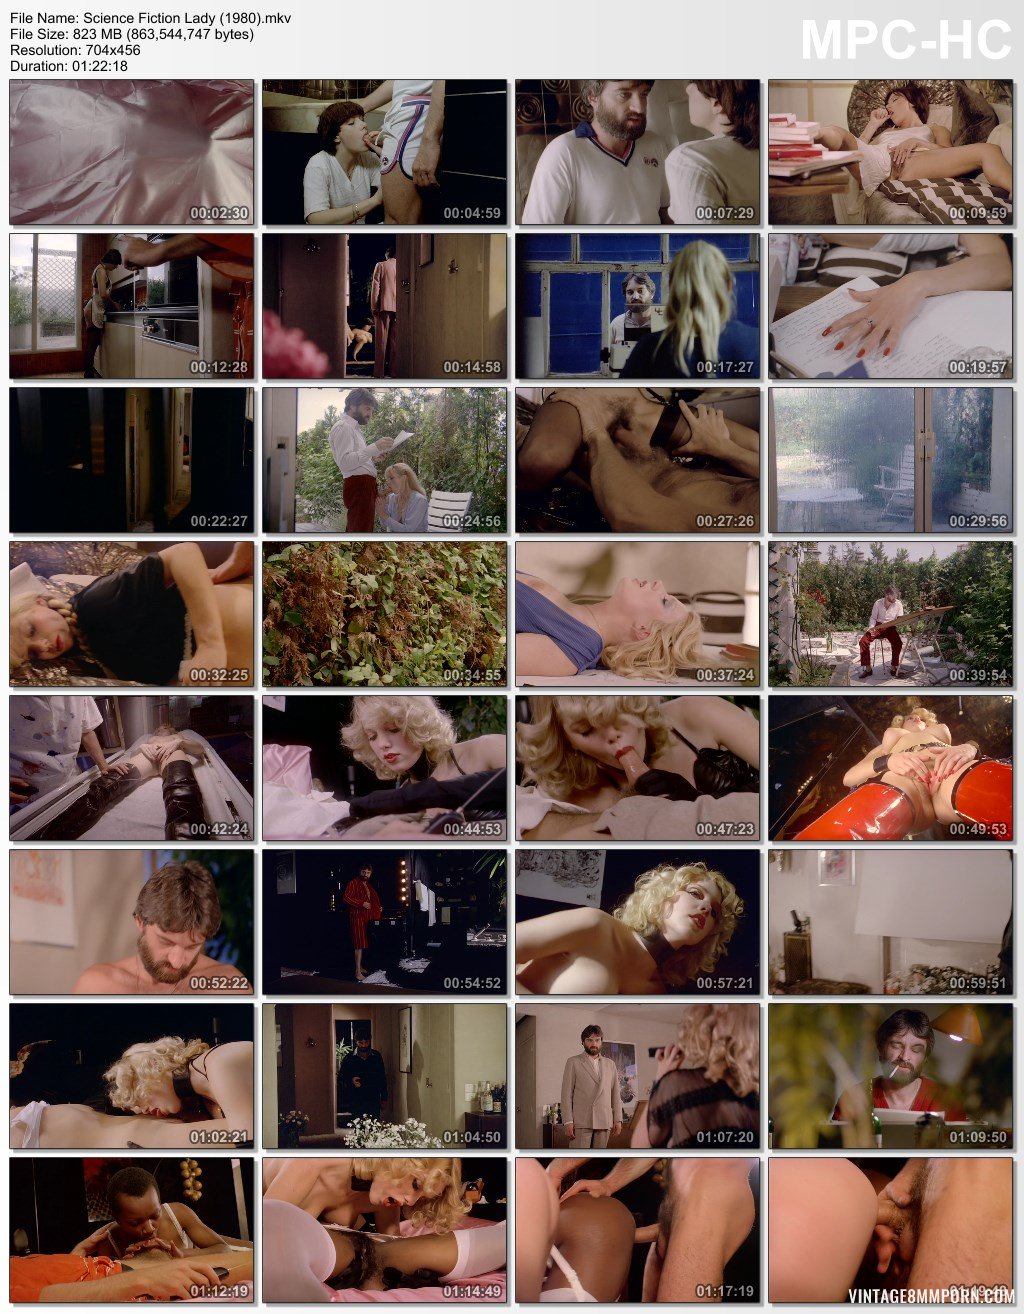 1024px x 1314px - Science Fiction Lady (1980) Â» Vintage 8mm Porn, 8mm Sex Films, Classic Porn,  Stag Movies, Glamour Films, Silent loops, Reel Porn